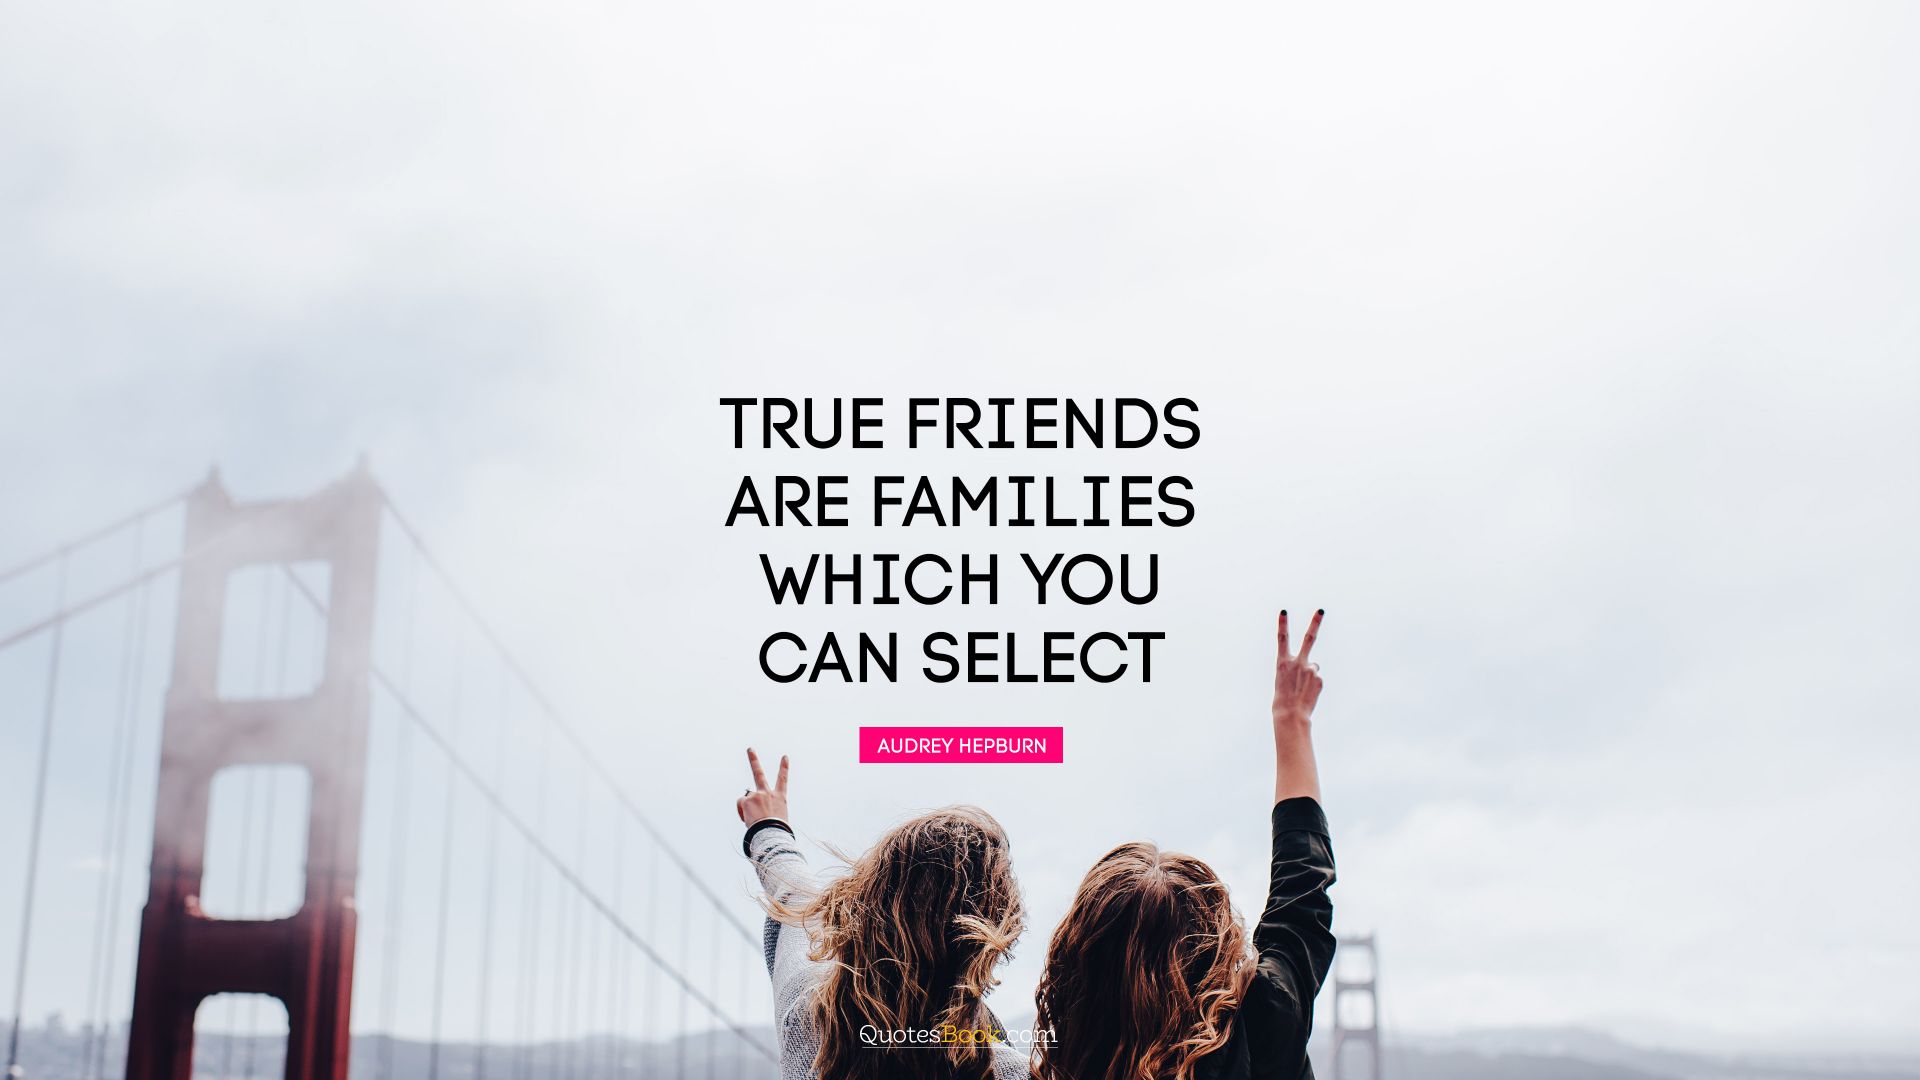 True friends are families which you can select. - Quote by Audrey Hepburn